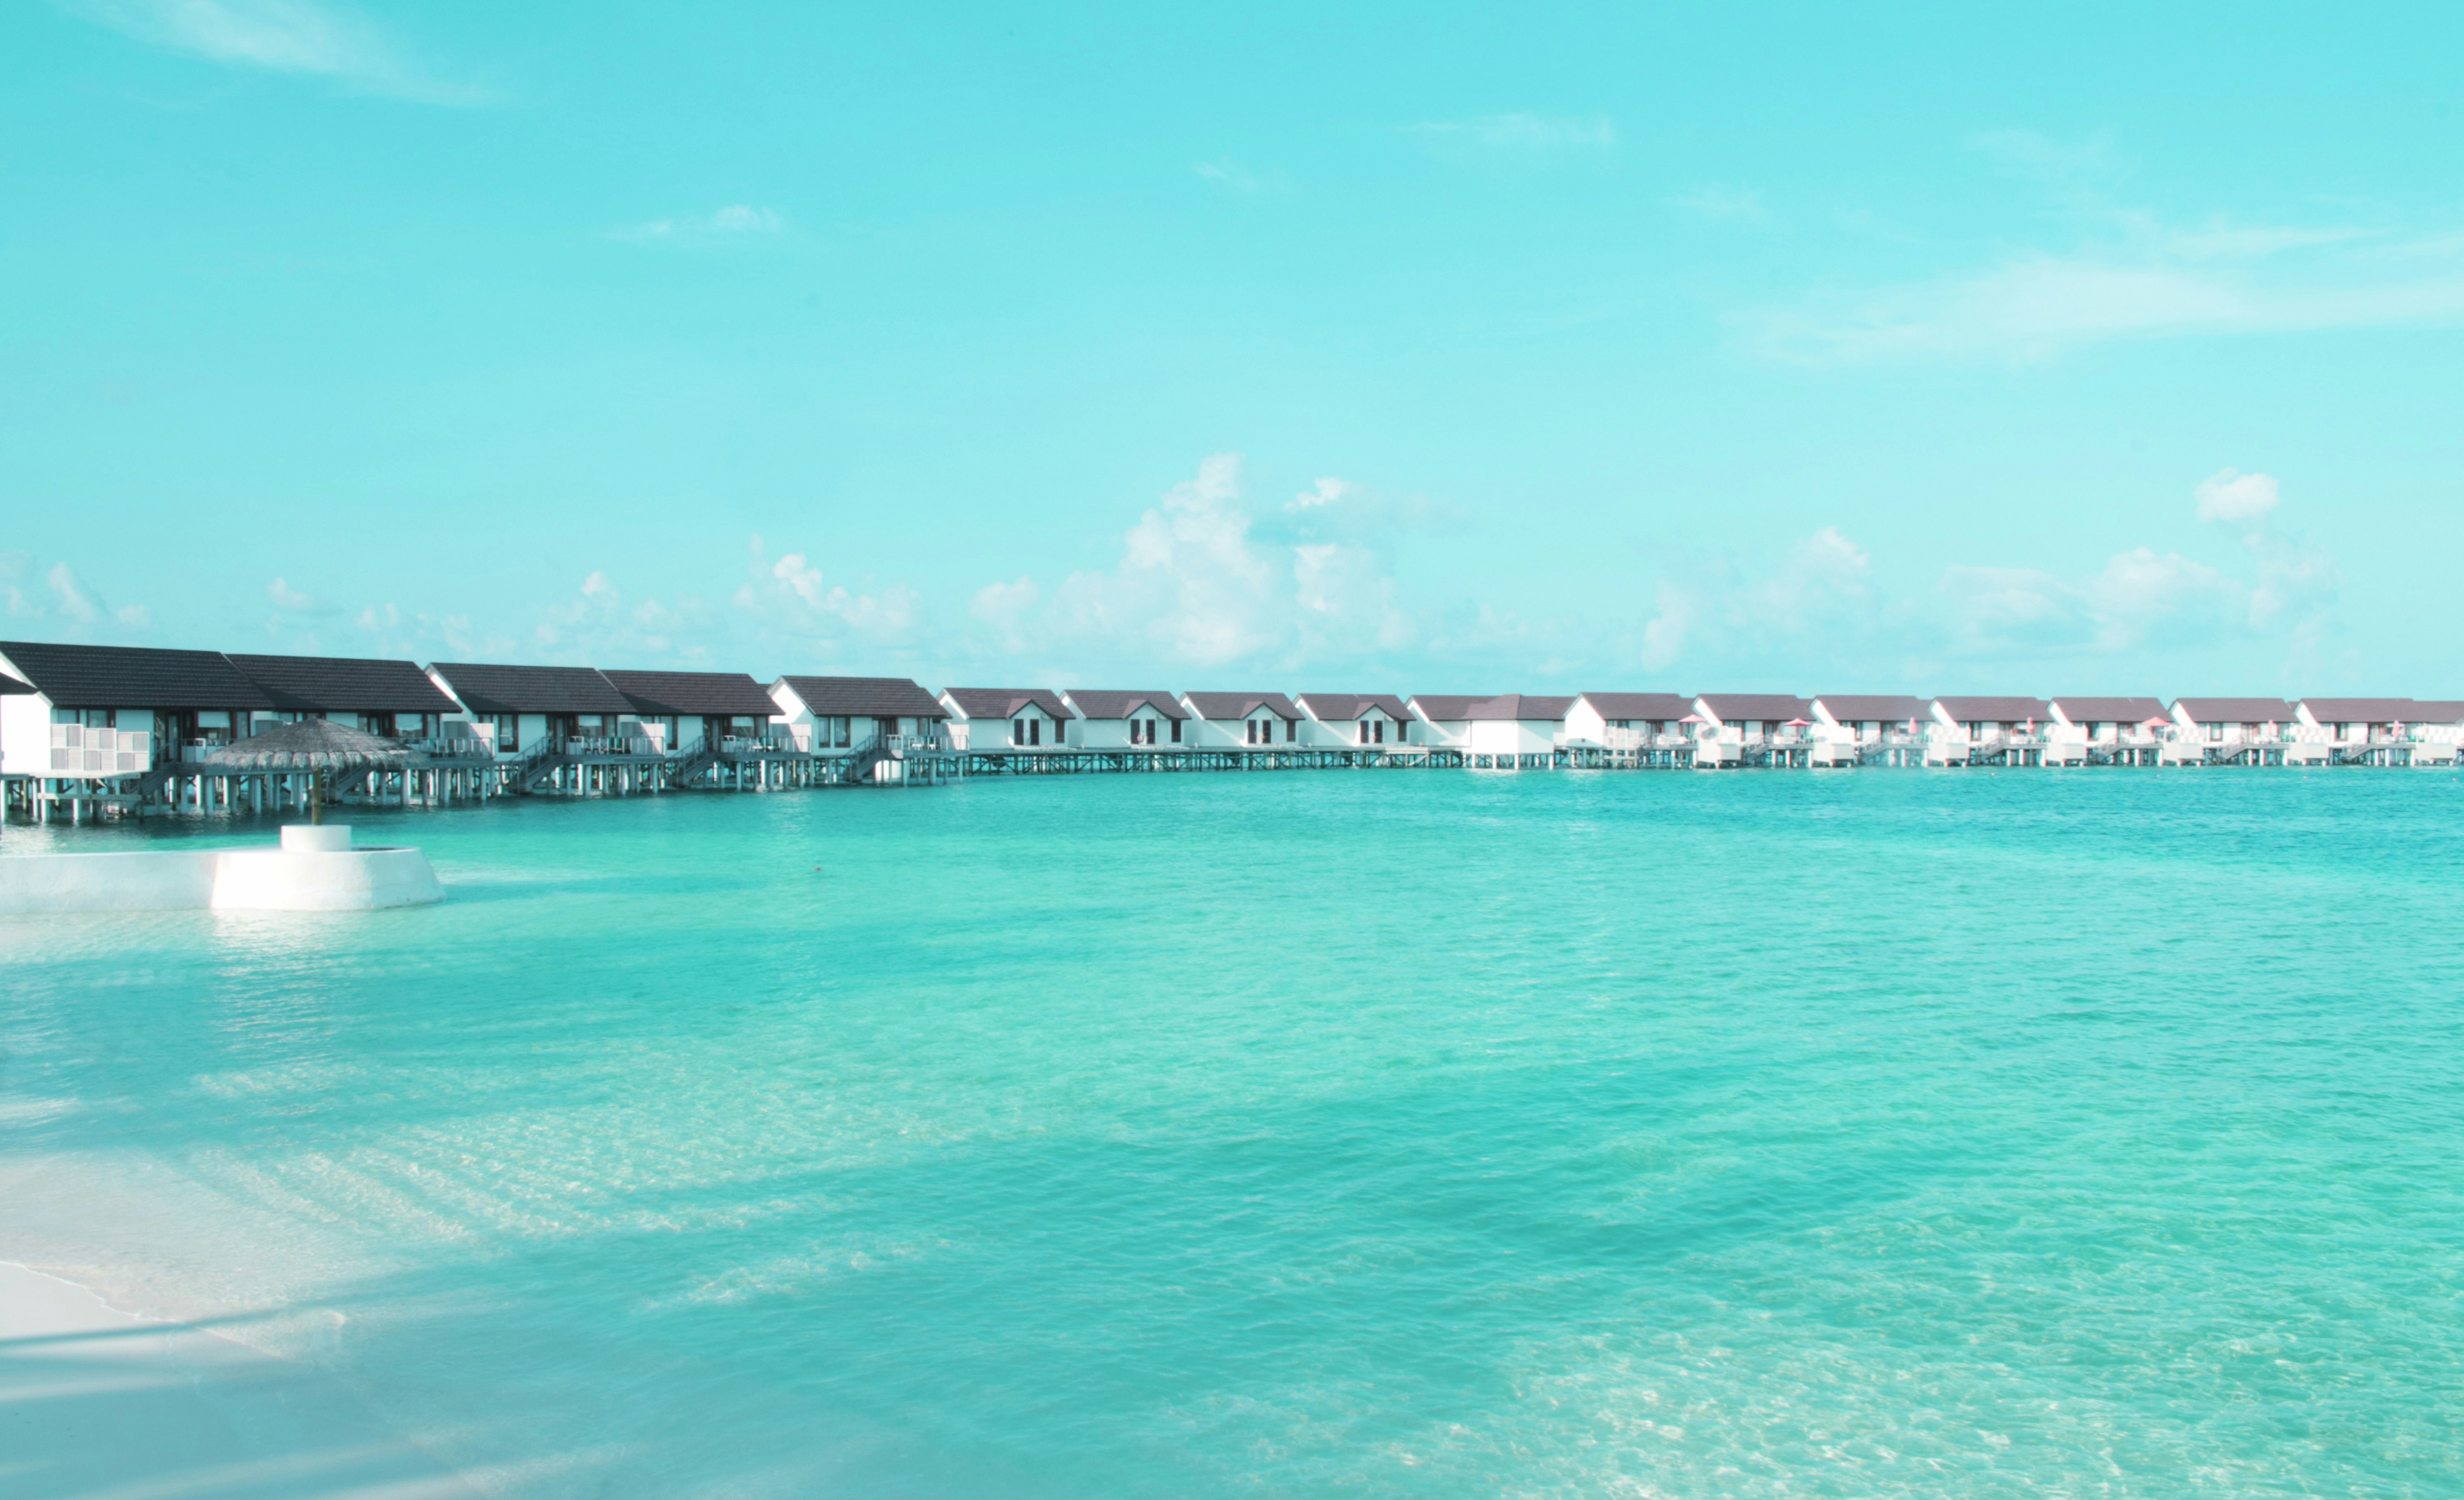 Overwater bungalows over the blue blue ocean